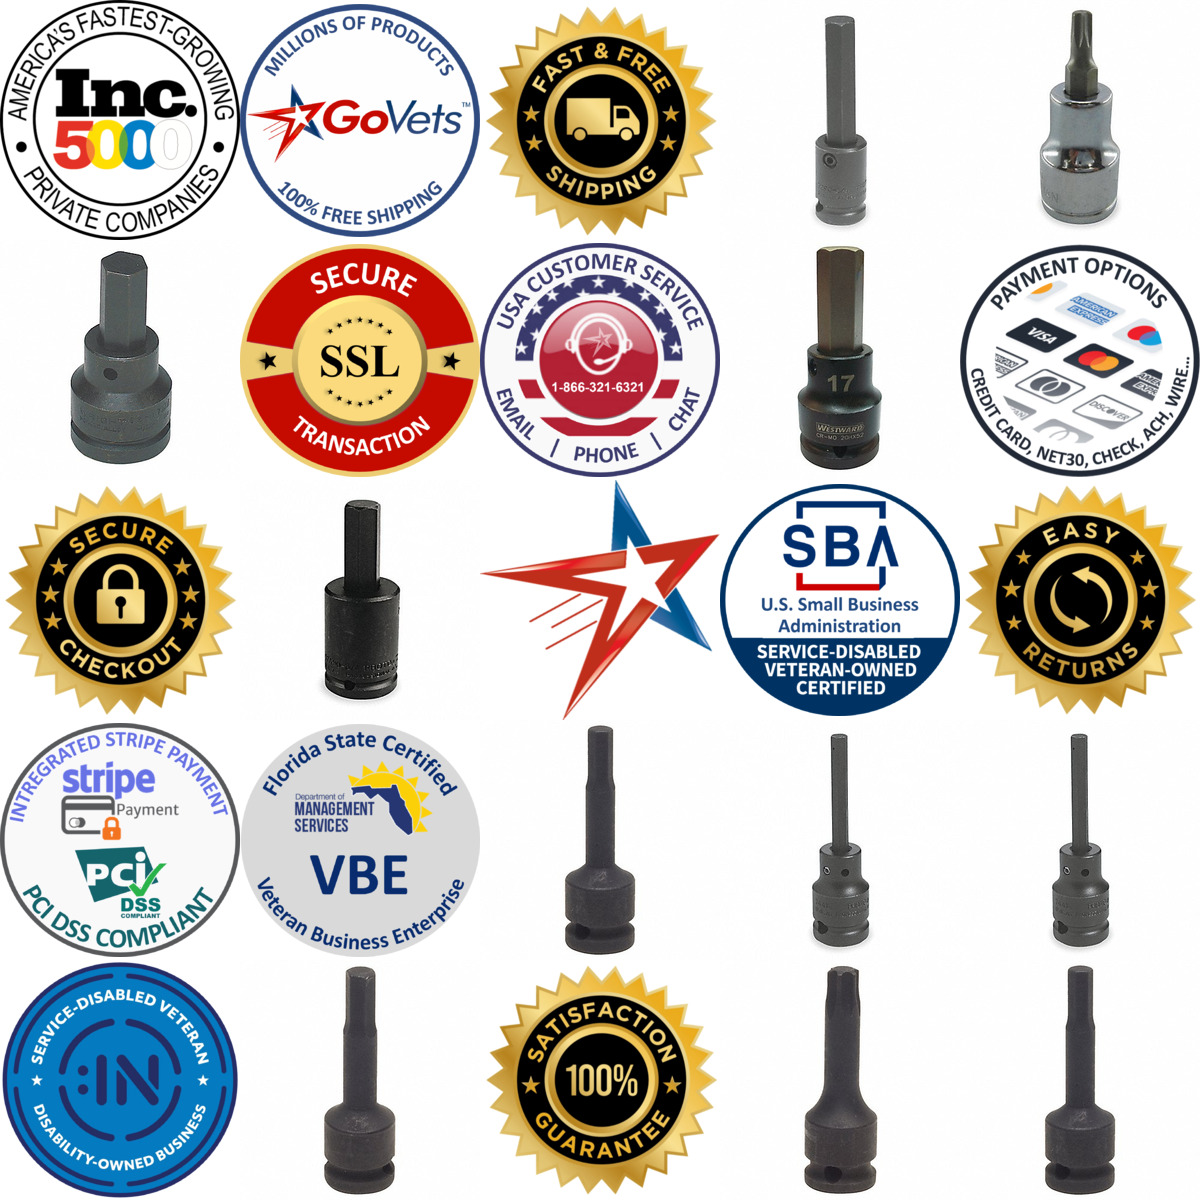 A selection of Impact Socket Bits products on GoVets